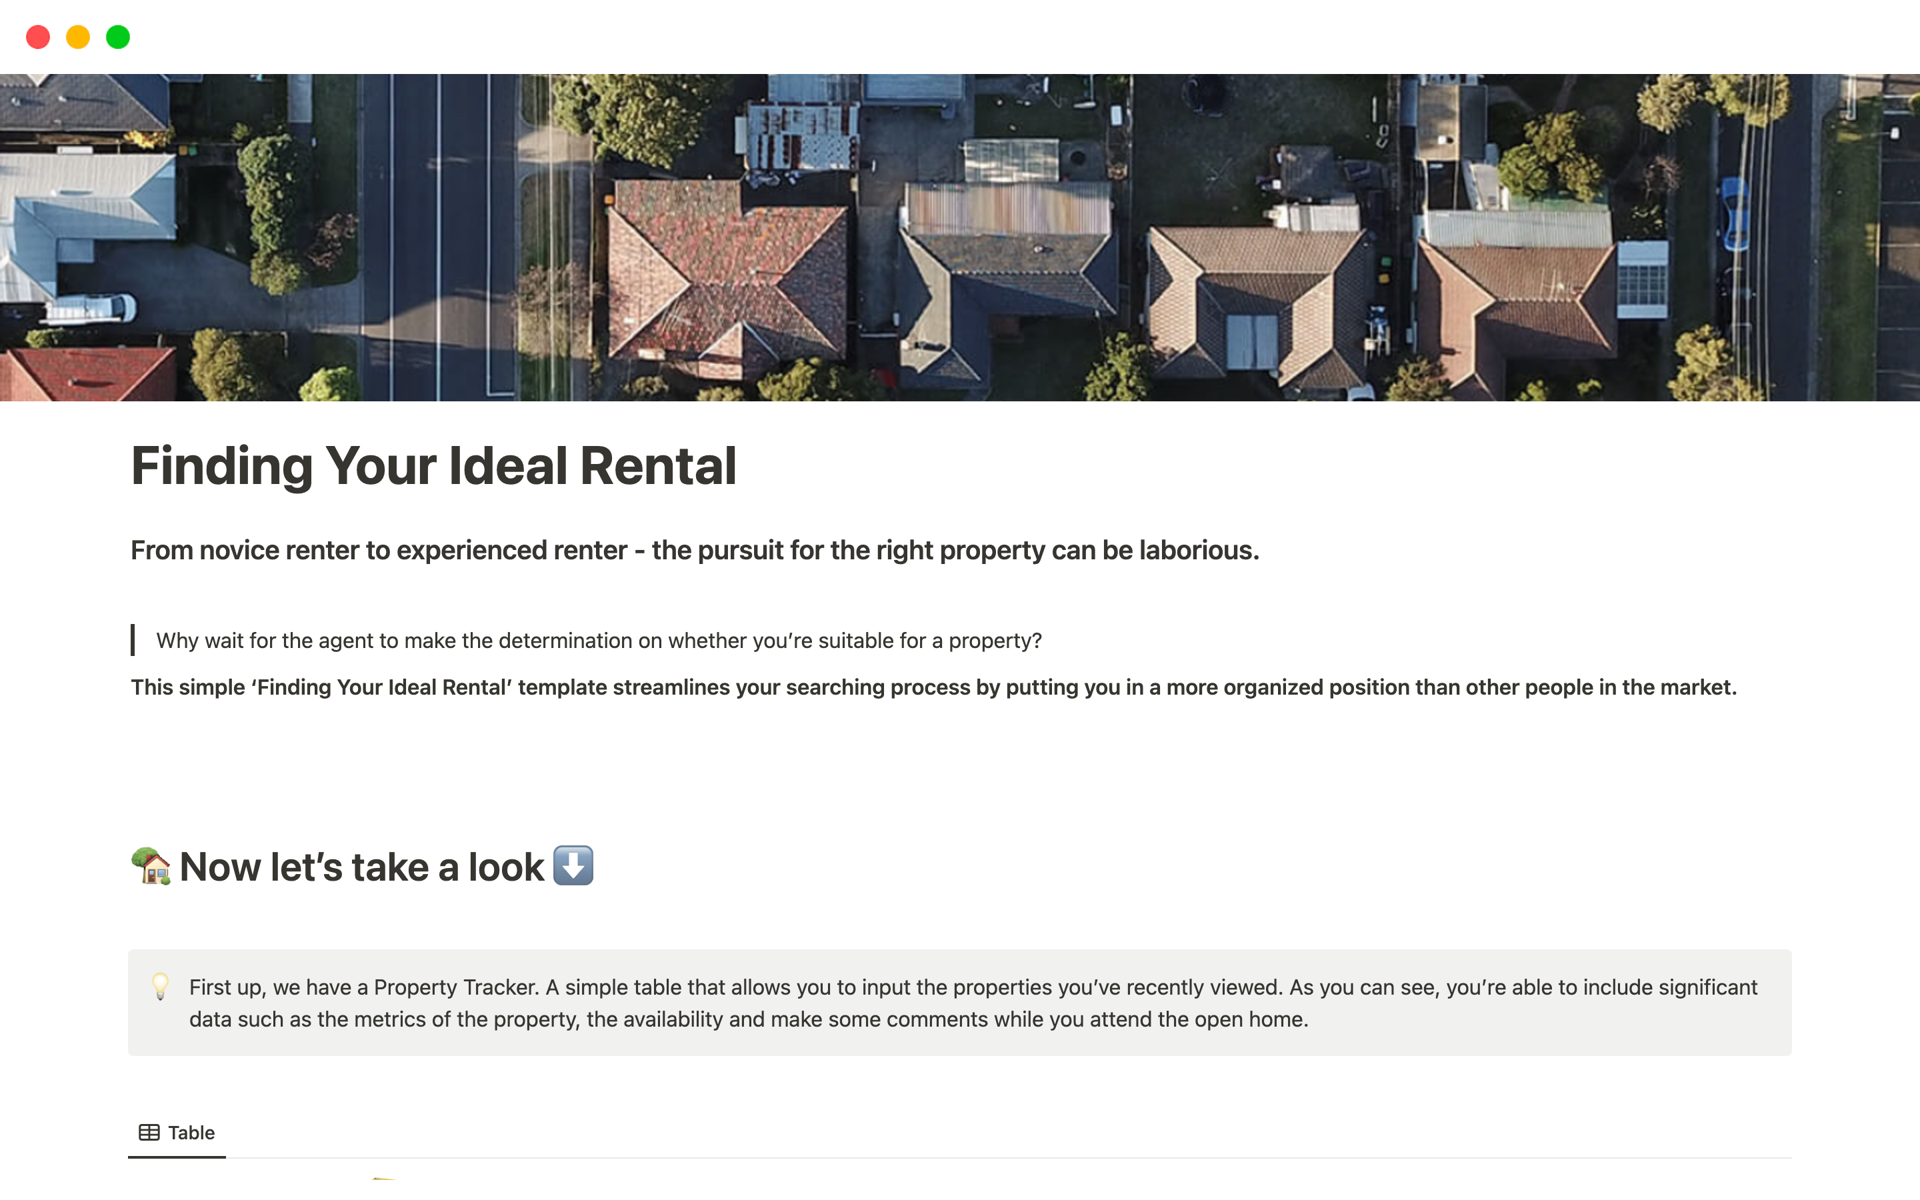 Provides key items of consideration that prospective renters should consider when searching for a rental property. 